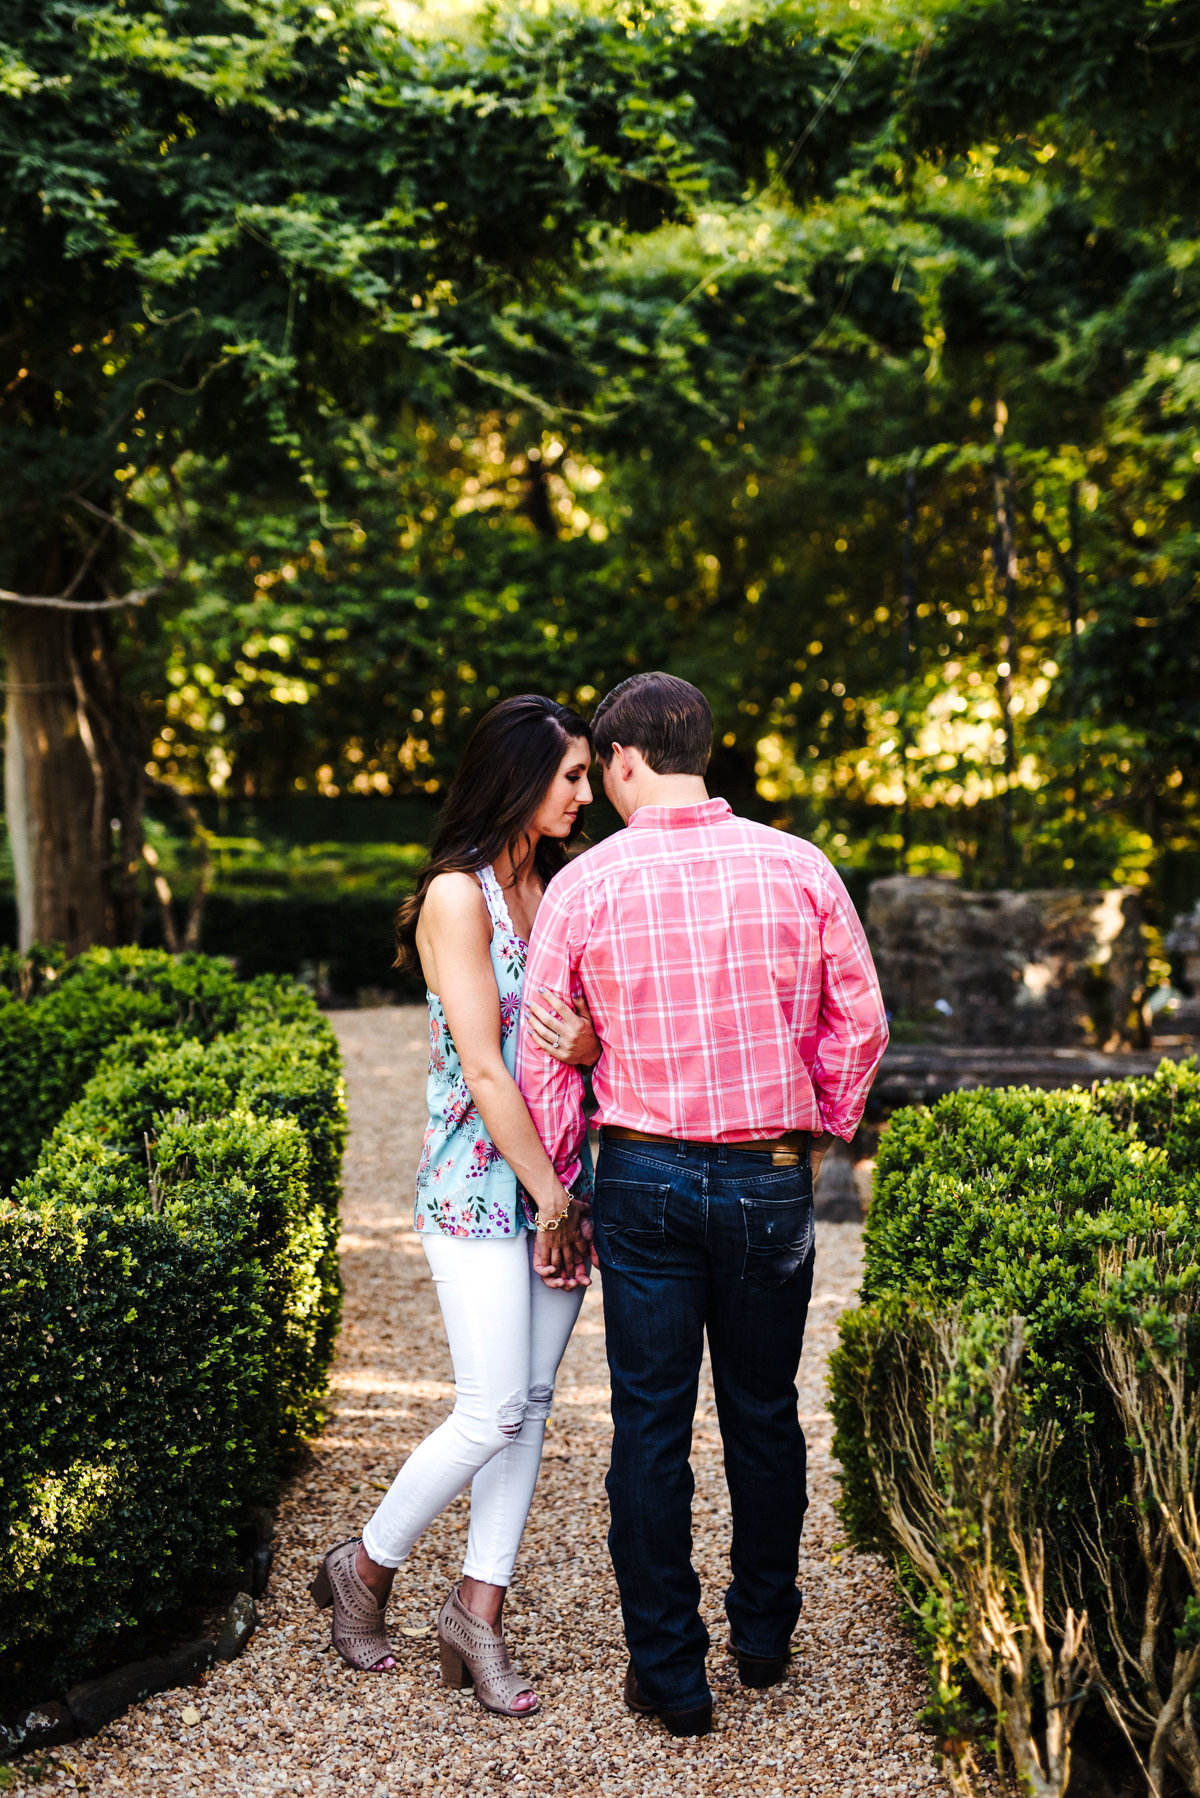 Hills and Dales Estate Engagement Session - 9